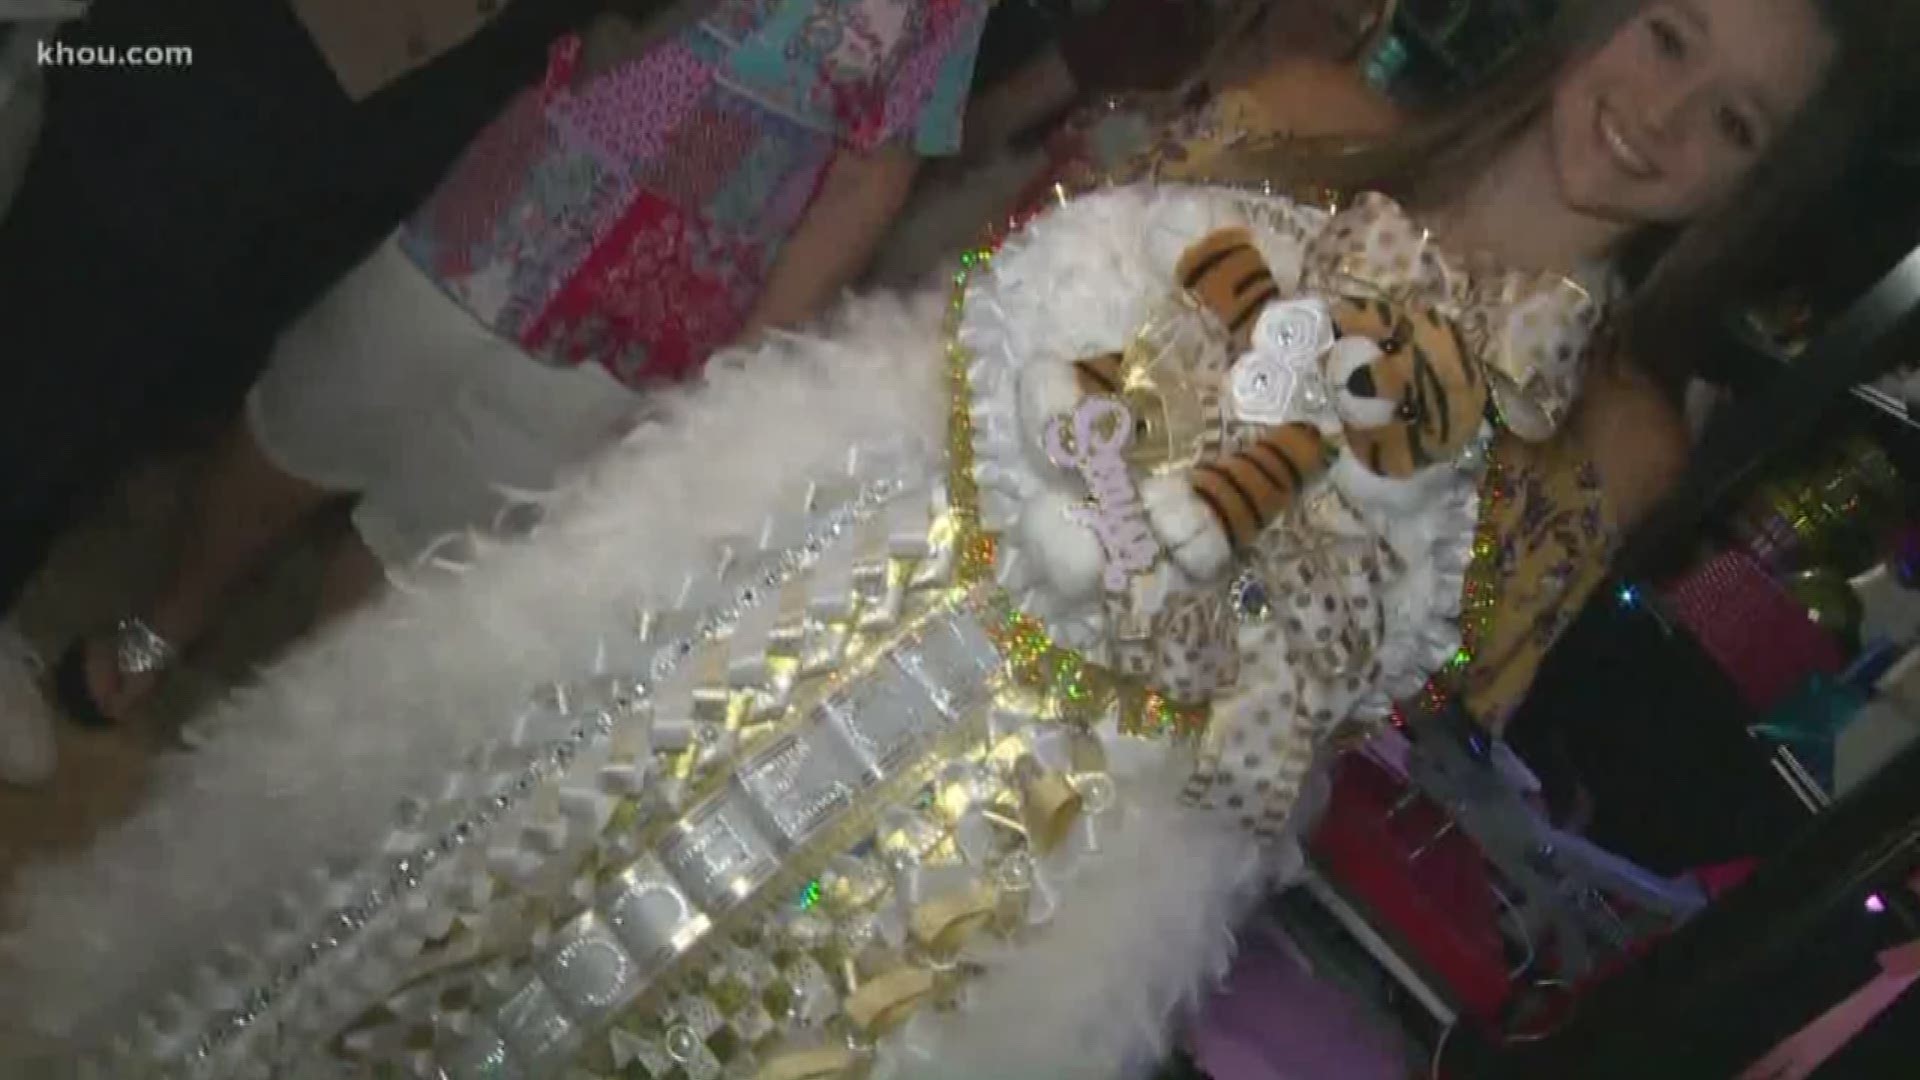 It's homecoming season in Texas and that means mums. High schoolers go all-out on the lavish creations this time of year.